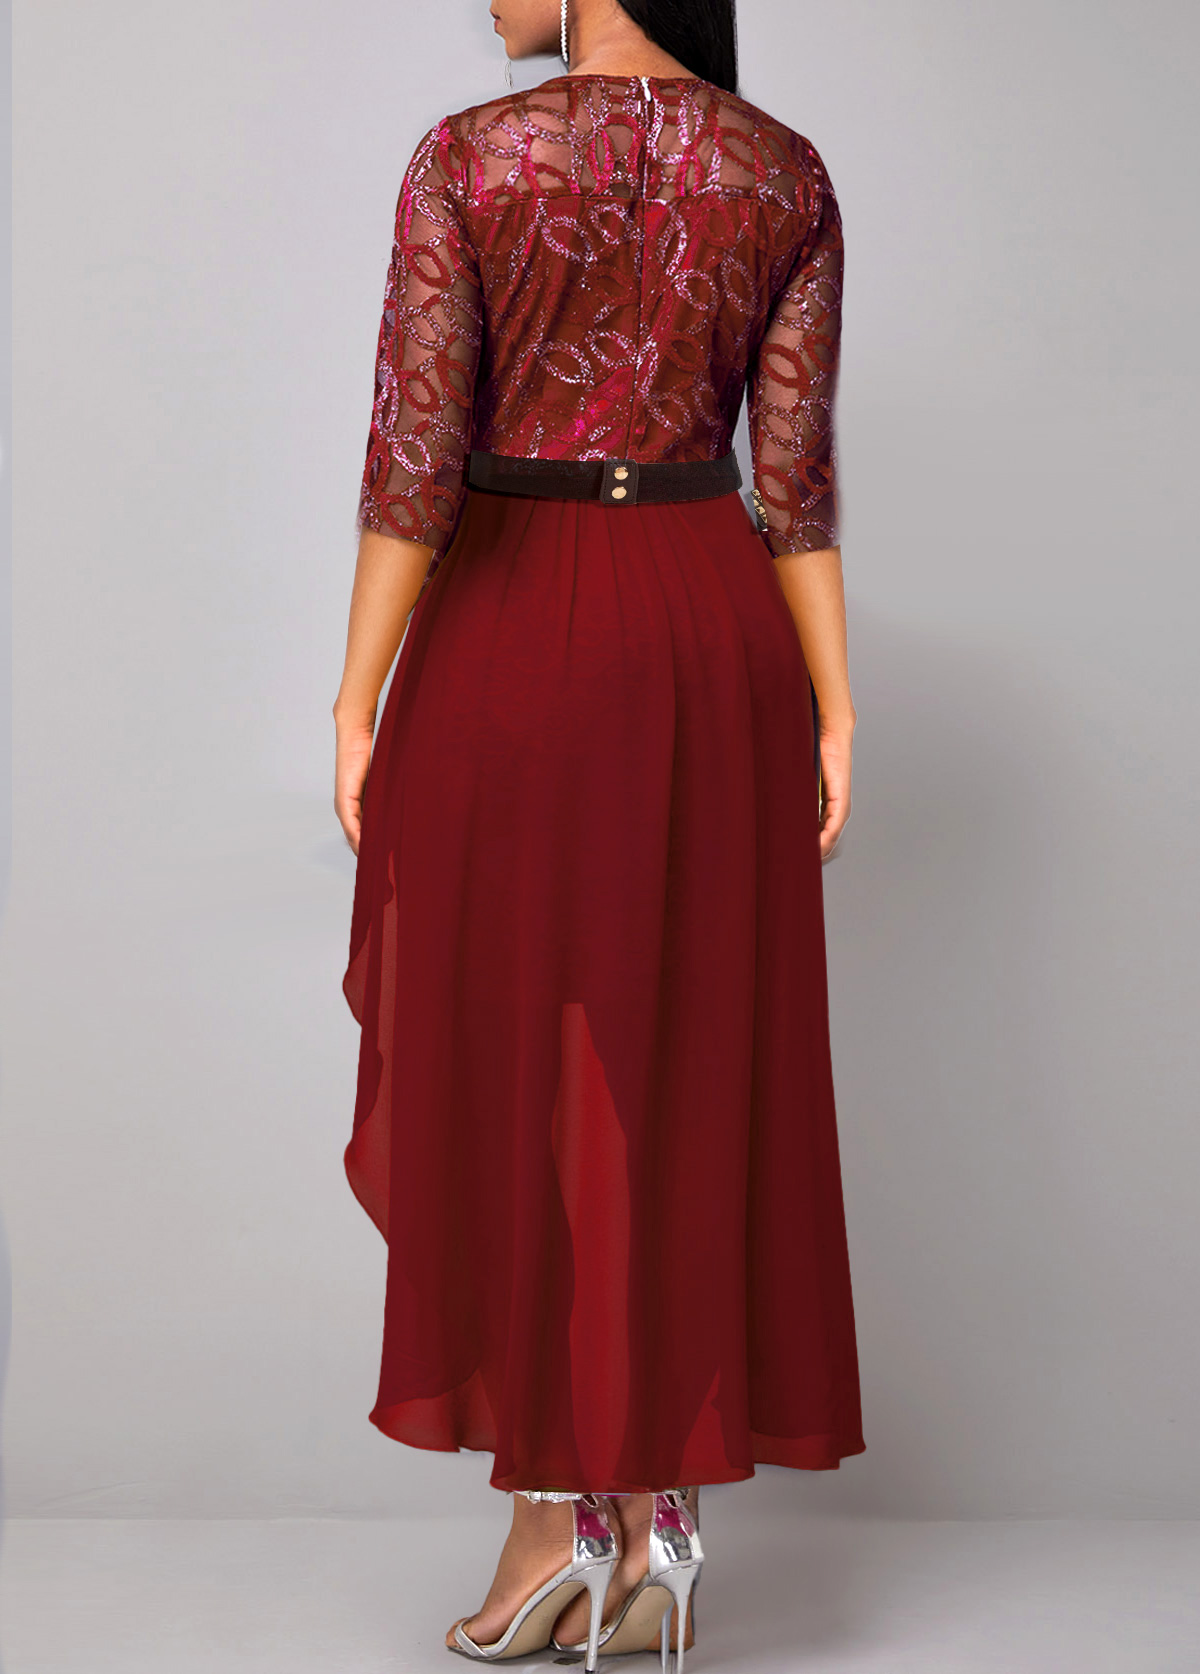 Lace Patchwork Wine Red 3/4 Sleeve Dress